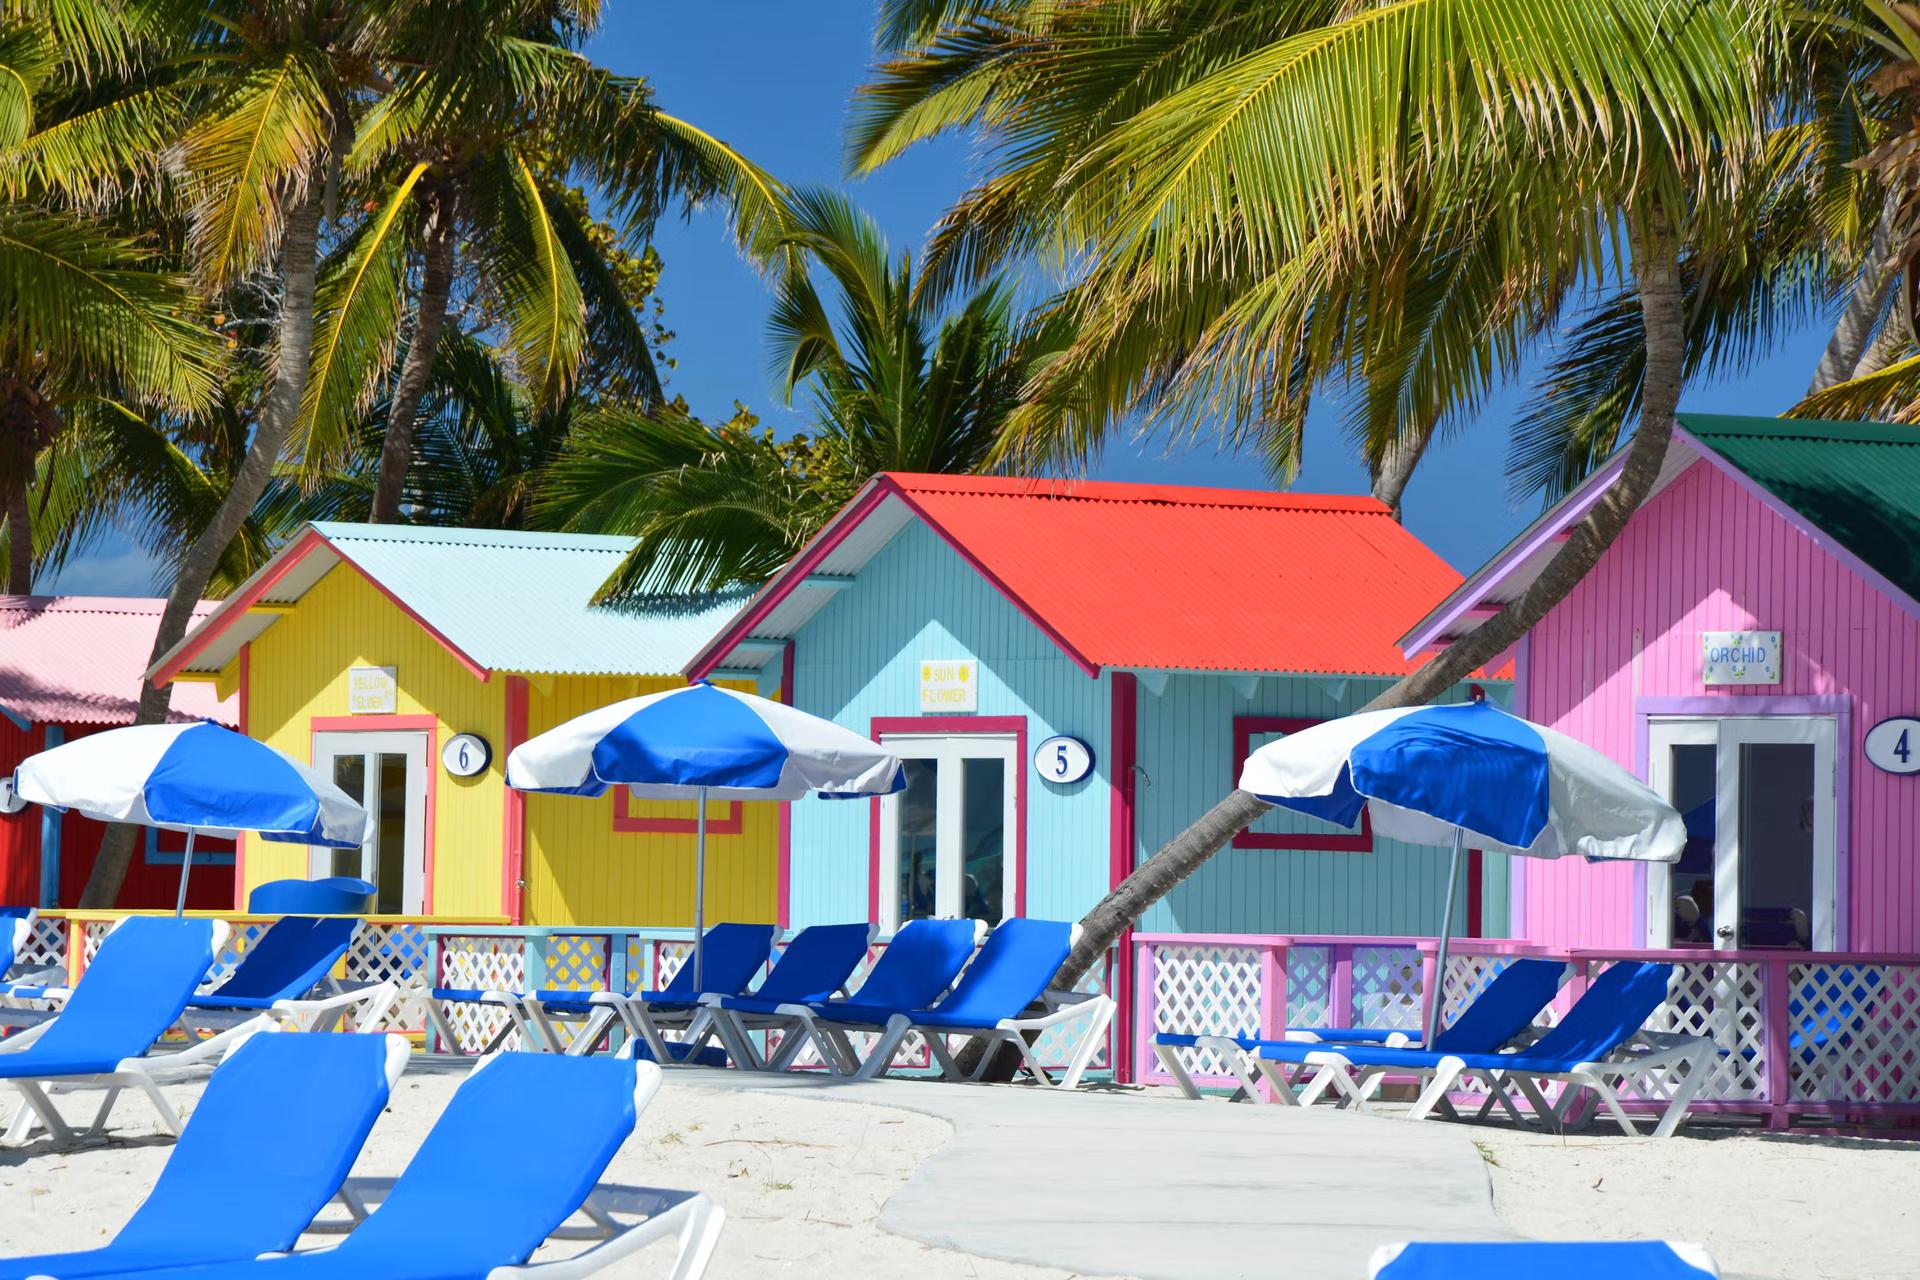 Colorful bungalows and lounge chairs on Princess Cays beach, Eleuthera, Bahamas